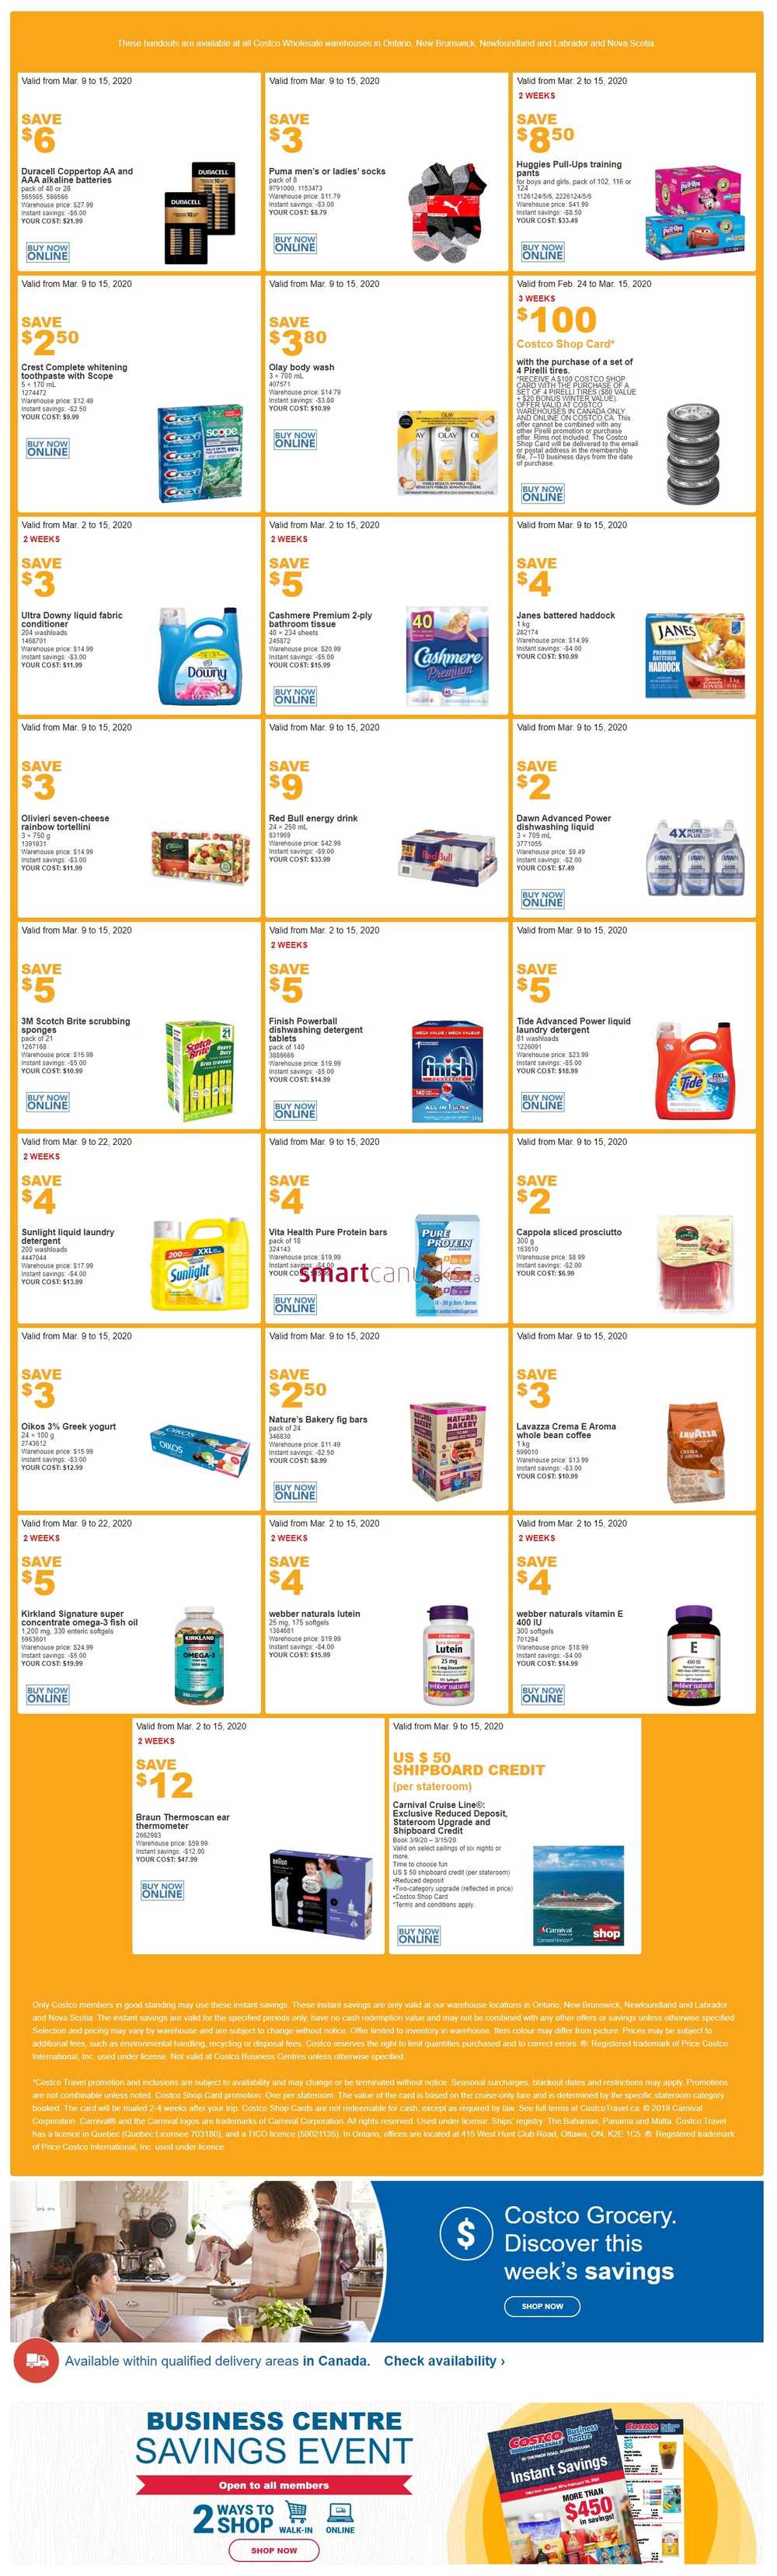 Costco (ON & Atlantic Canada) Weekly Savings March 9 to 15